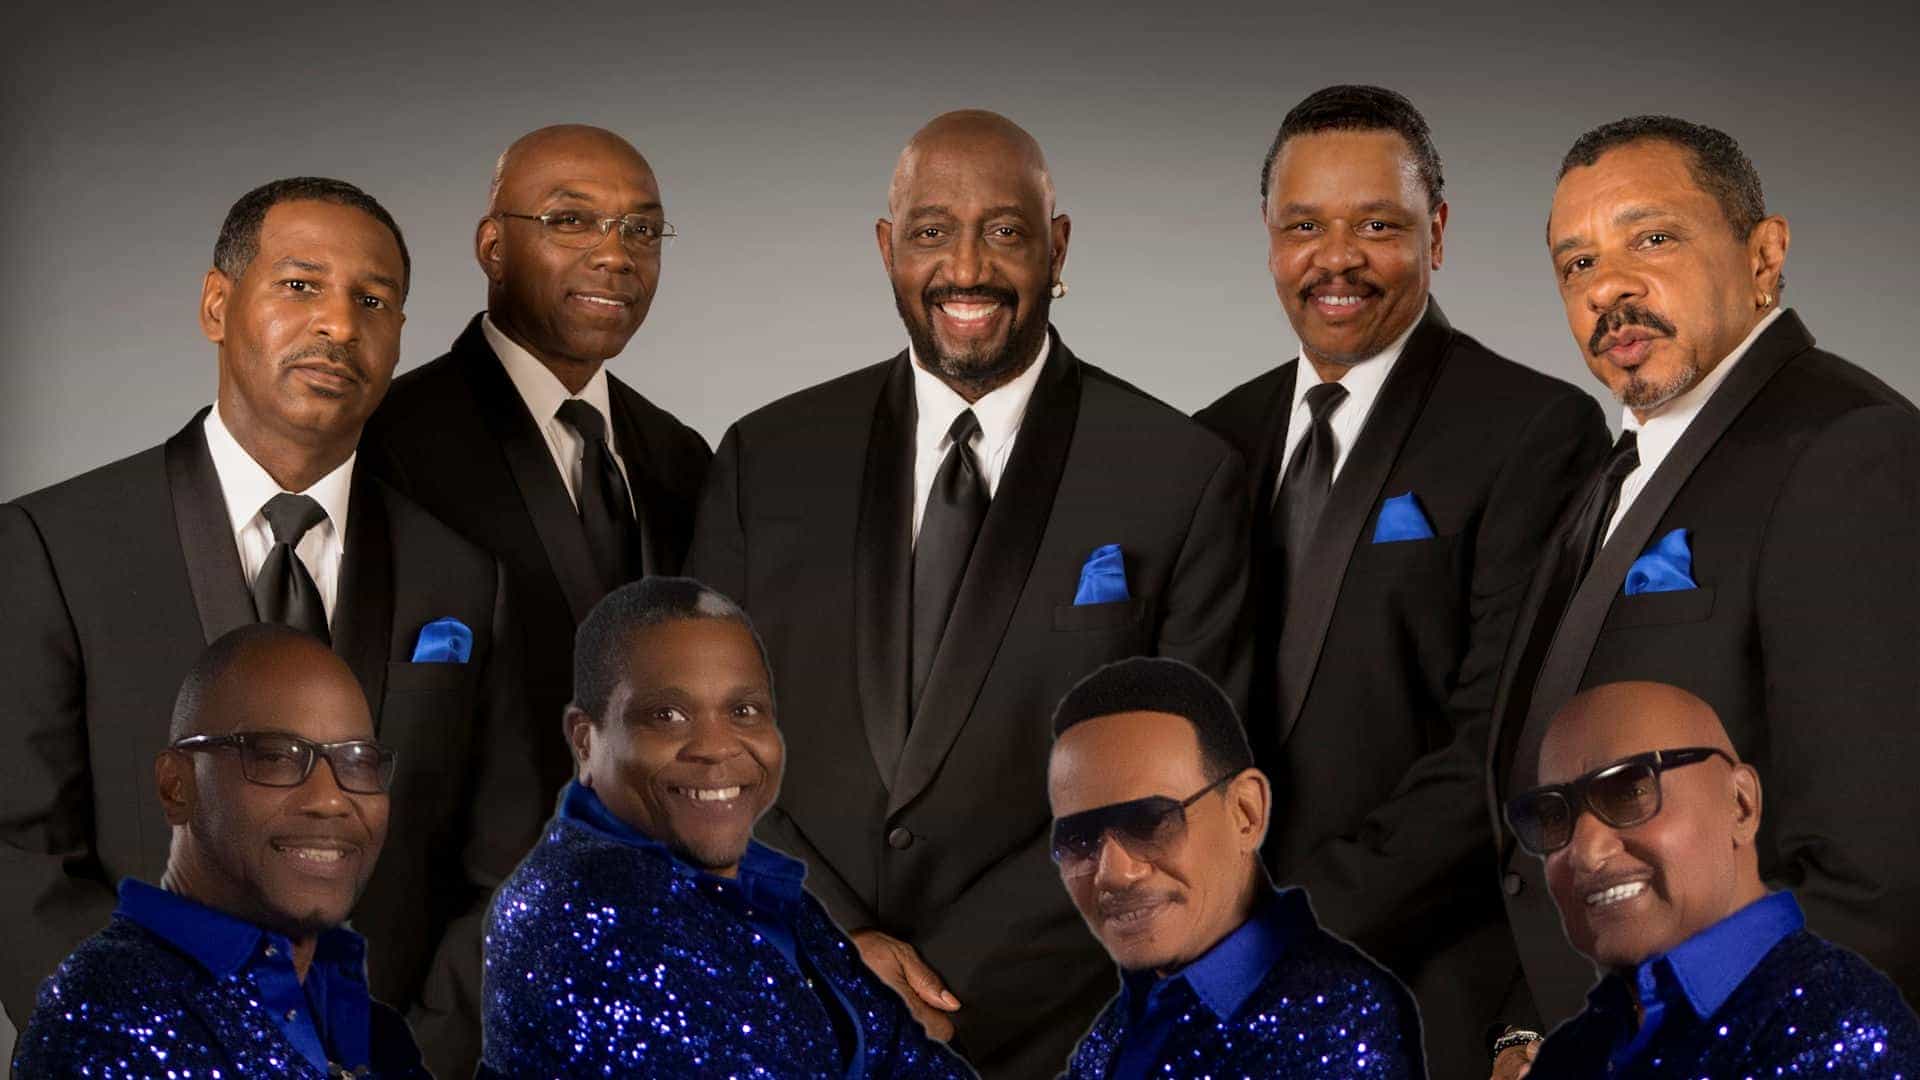 The Four Tops and Temptations